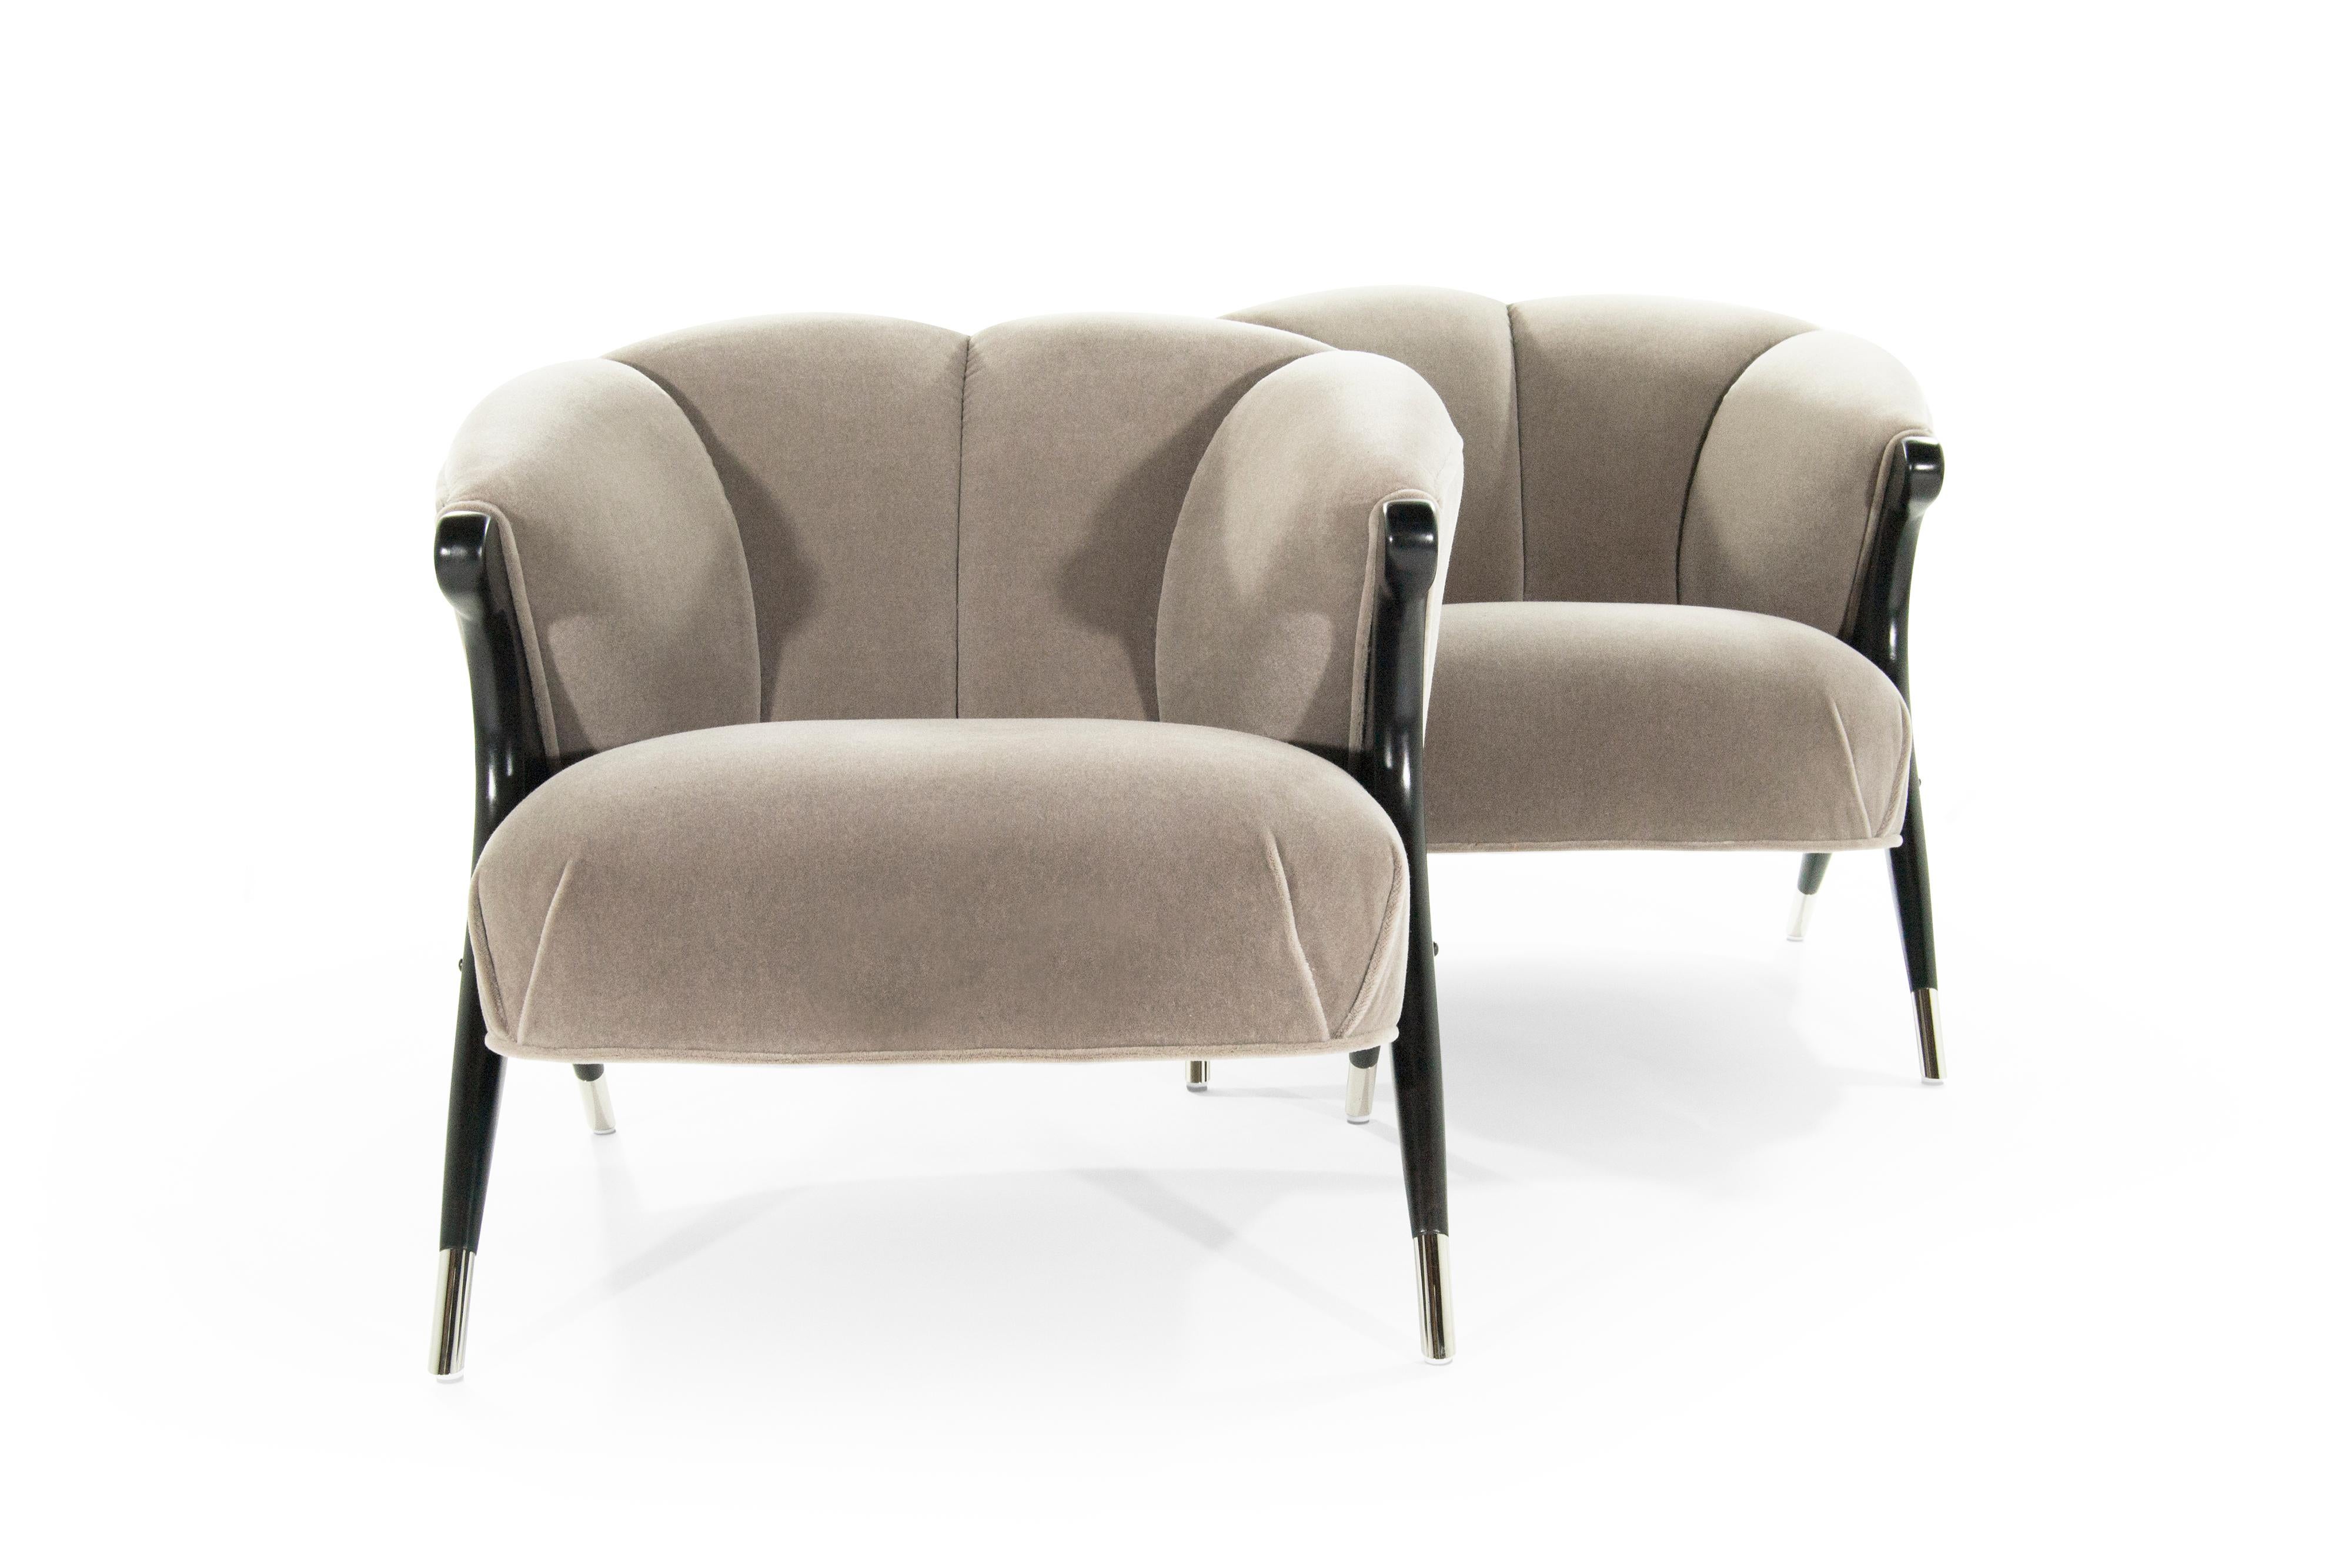 20th Century Modernist Karpen Lounge Chairs in Taupe Mohair, 1950s